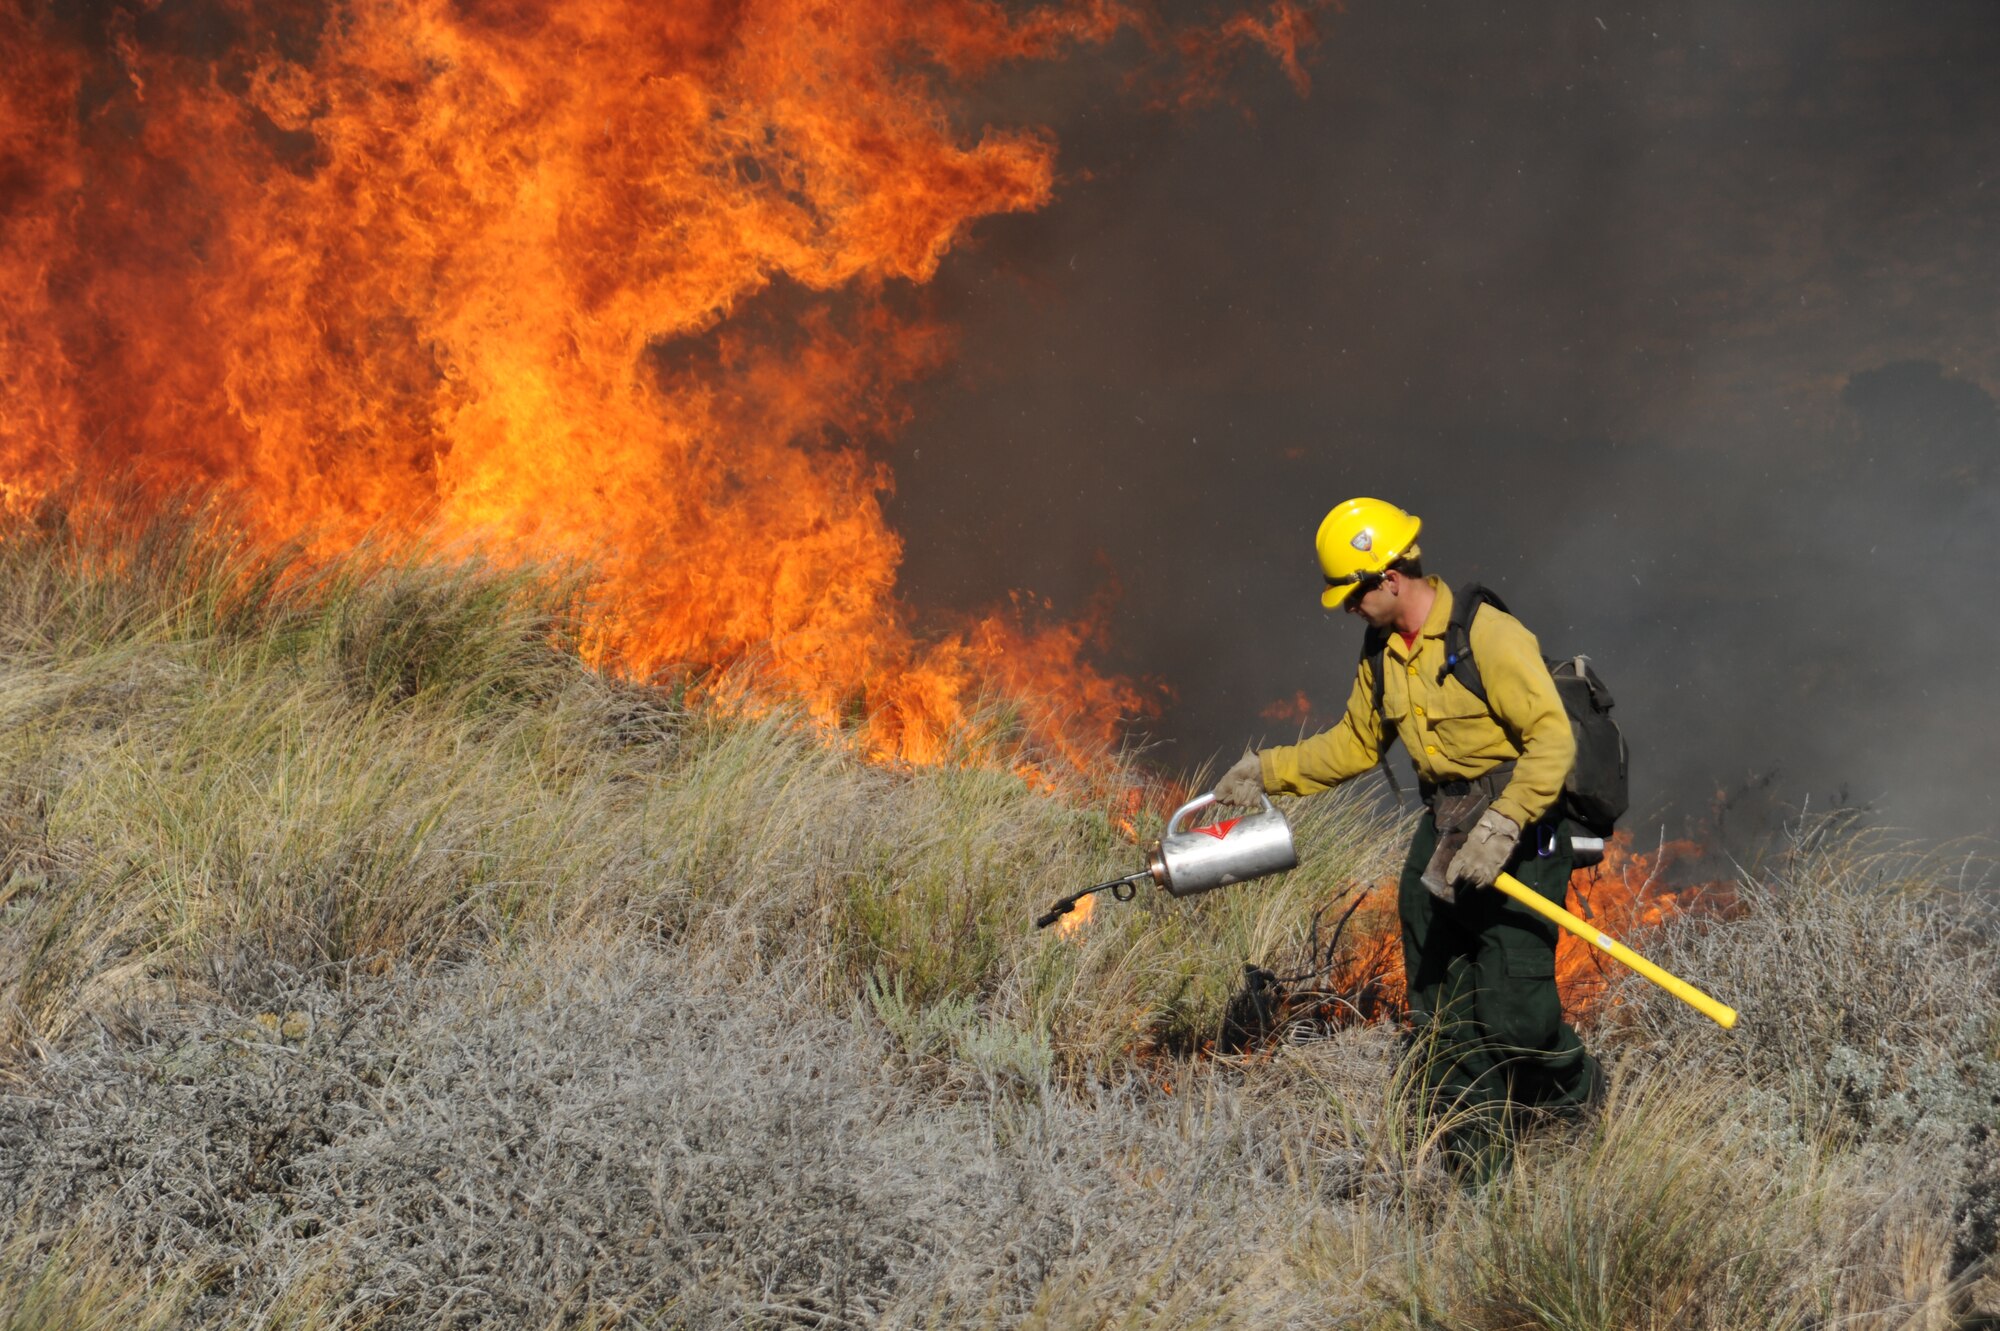 VANDENBERG AIR FORCE BASE, Calif.  -- A firefighter from the 30th Civil Engineer Squadron lights European beach grass on fire during a controlled burn to help enlarge the habitat for an endangered species of Western Snowy Plovers here Nov. 6.  (U.S. Air Force photo/Airman 1st Class Andrew Satran)
